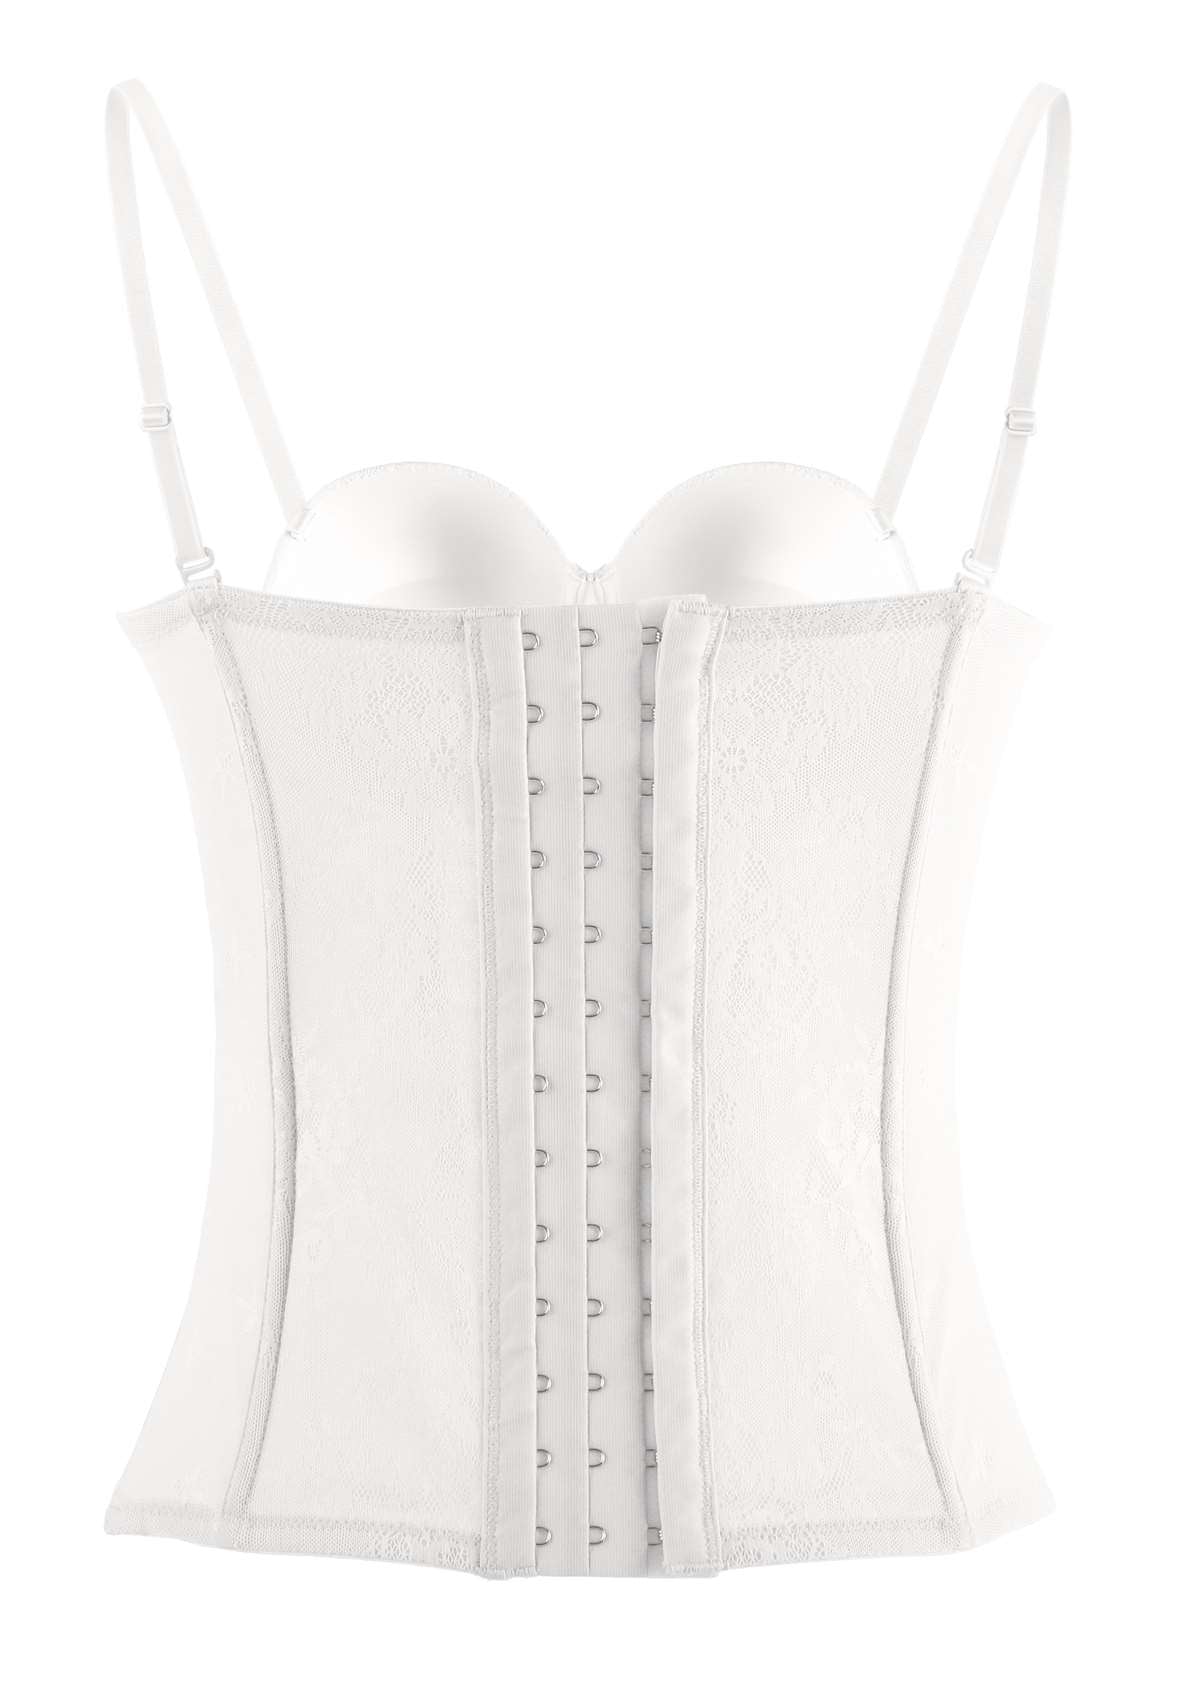 HSIA Gracious Vintage-Inspired Lace Overbust Elegant Corset Bustier - XL / White